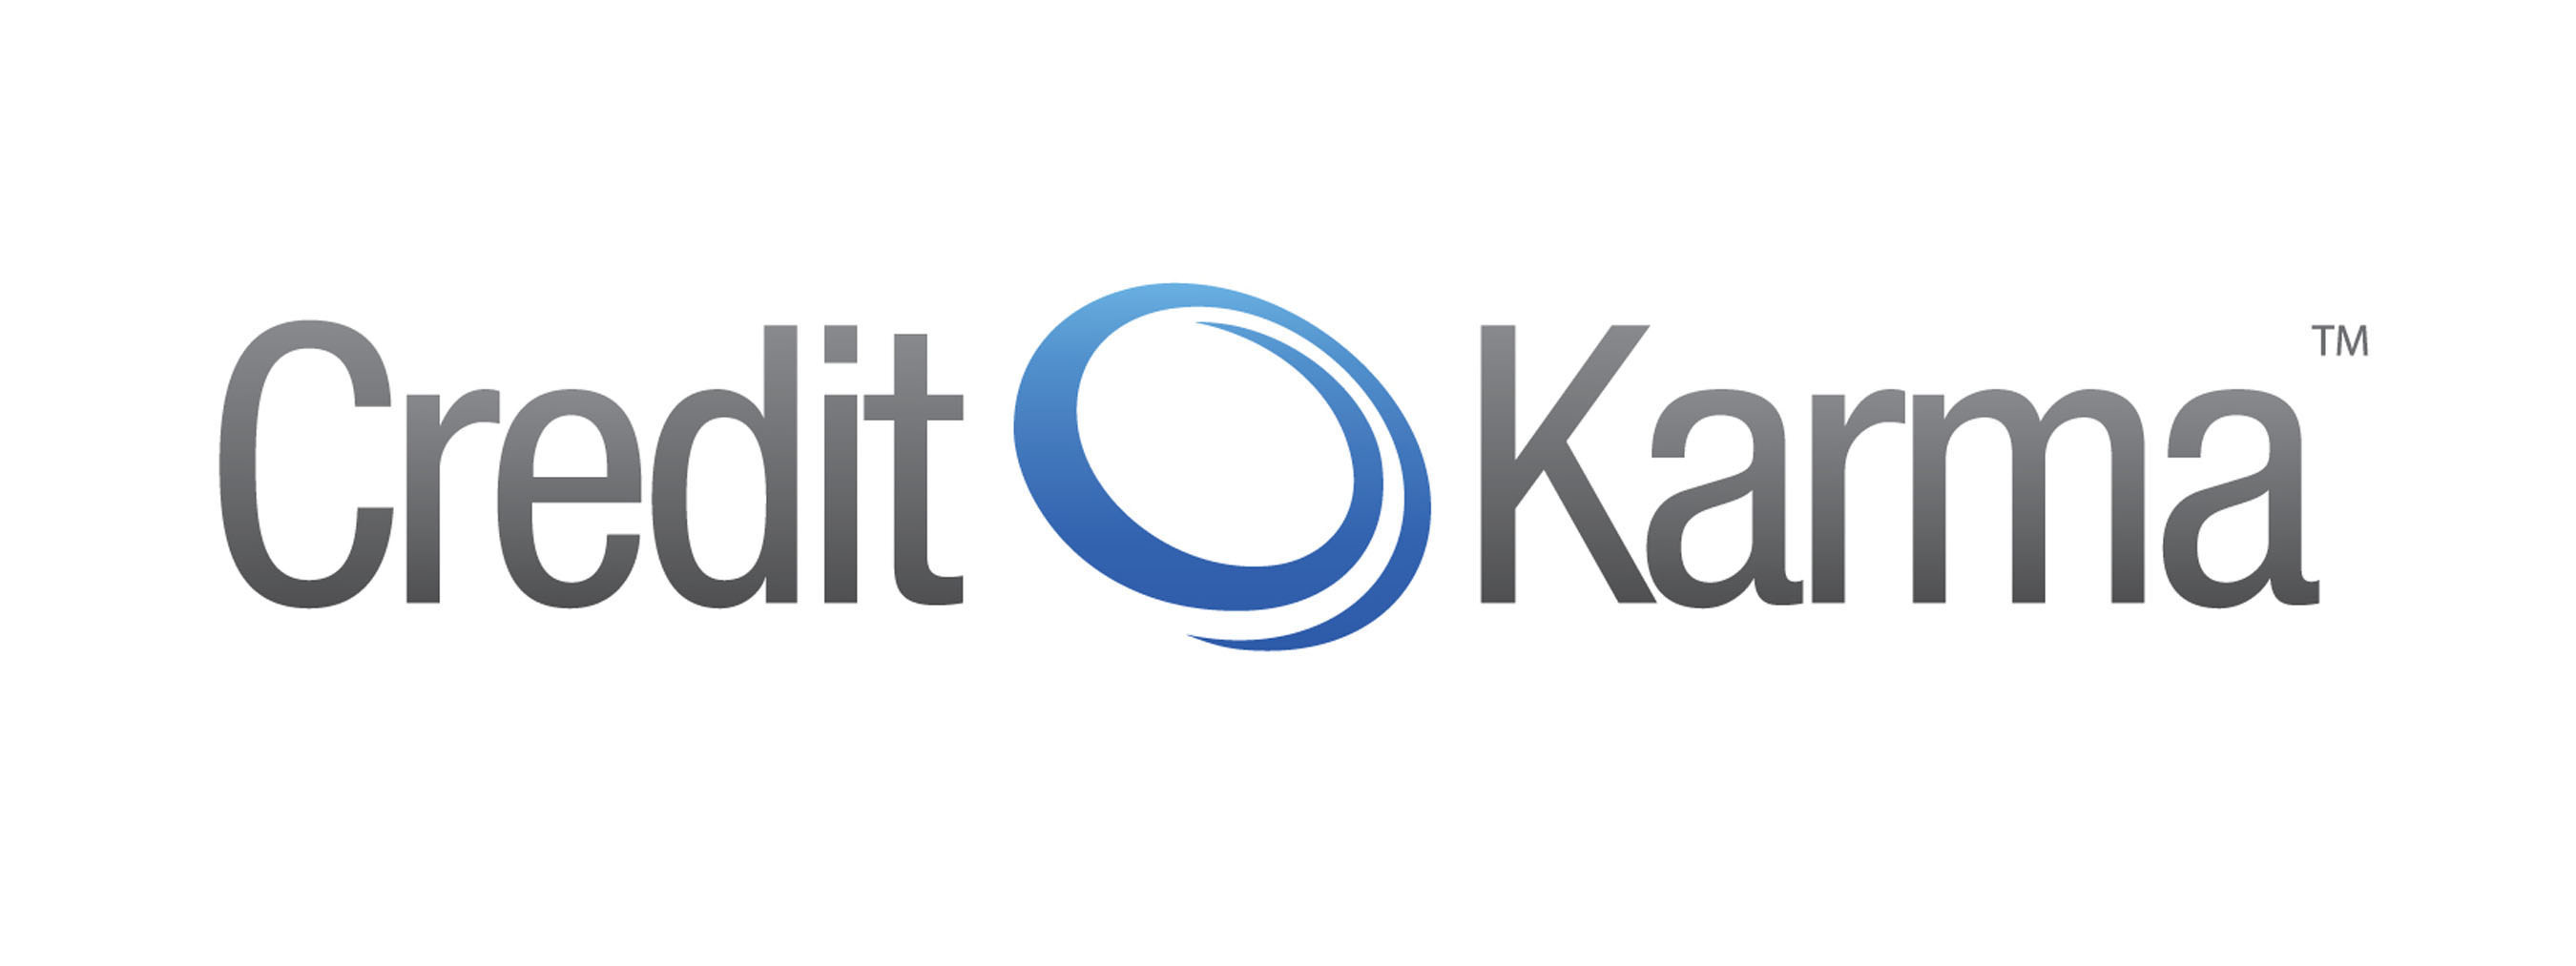 Credit Karma Announces $75MM New Investments From Existing Google Capital, Global Management And Susquehanna Growth Equity